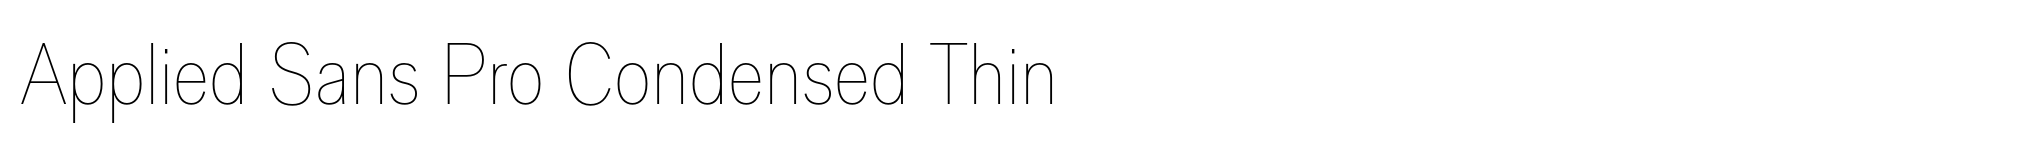 Applied Sans Pro Condensed Thin image